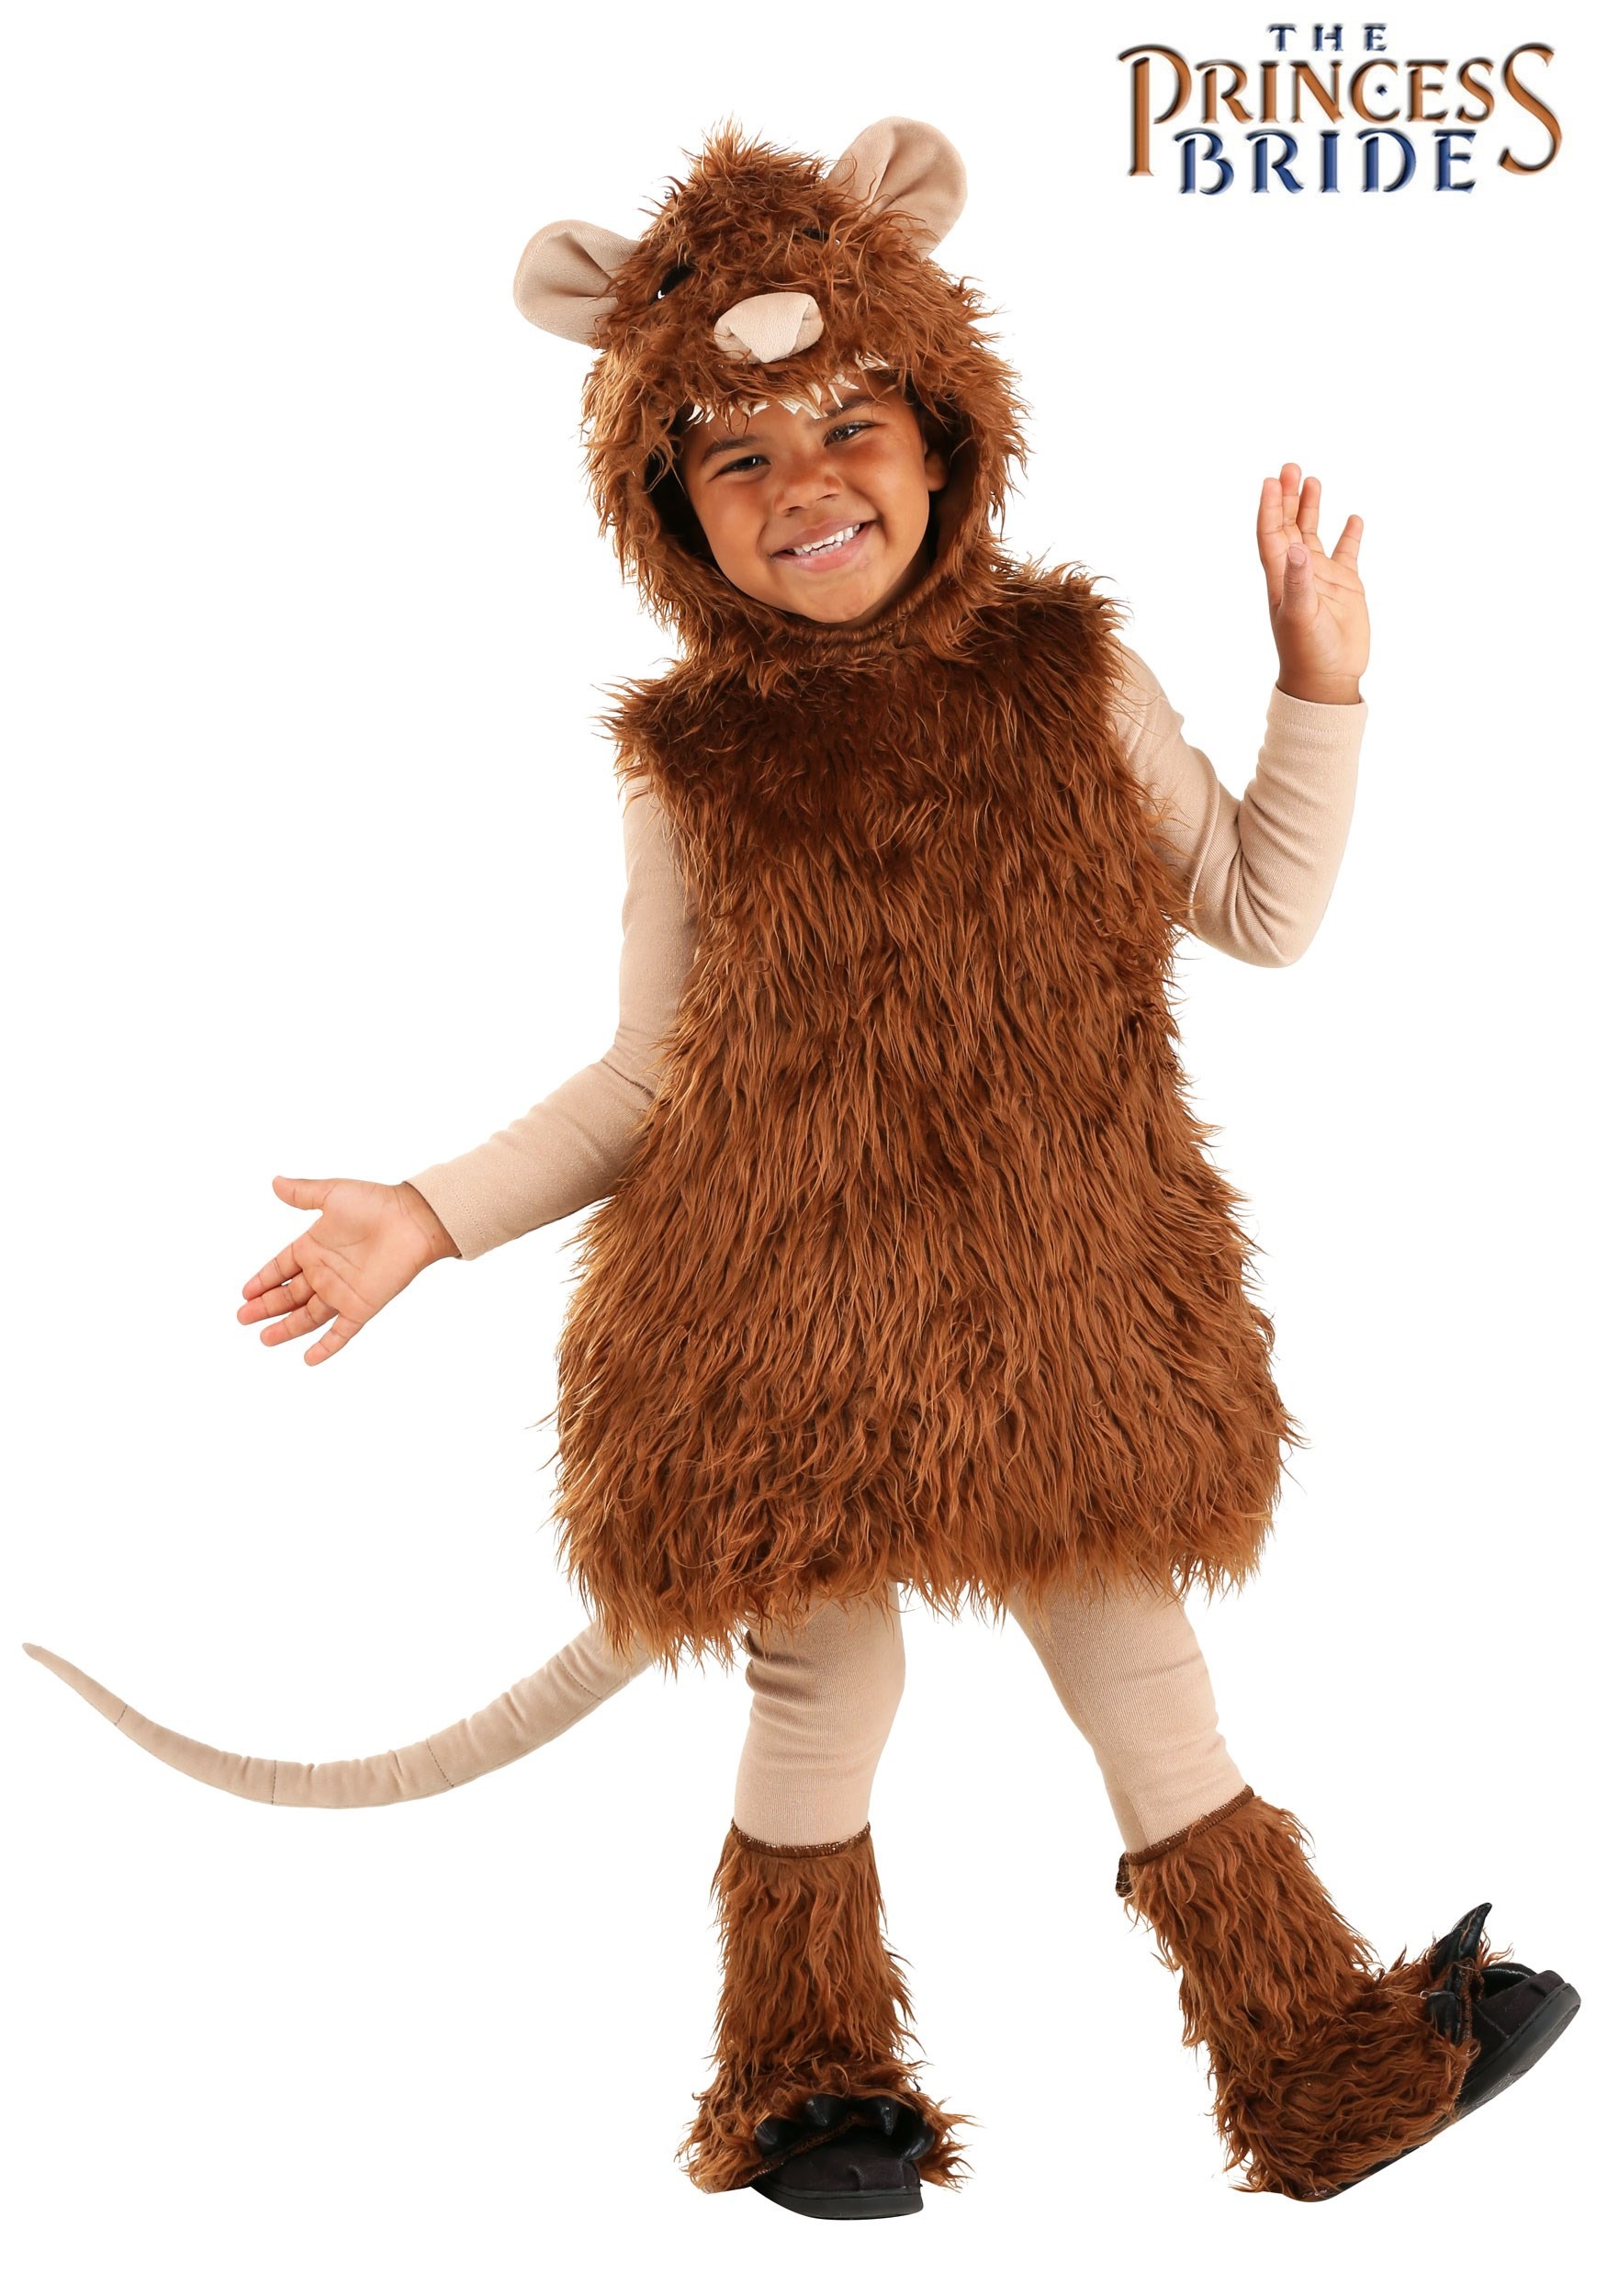 Toddler’s Princess Bride Rodent of Unusual Size Costume